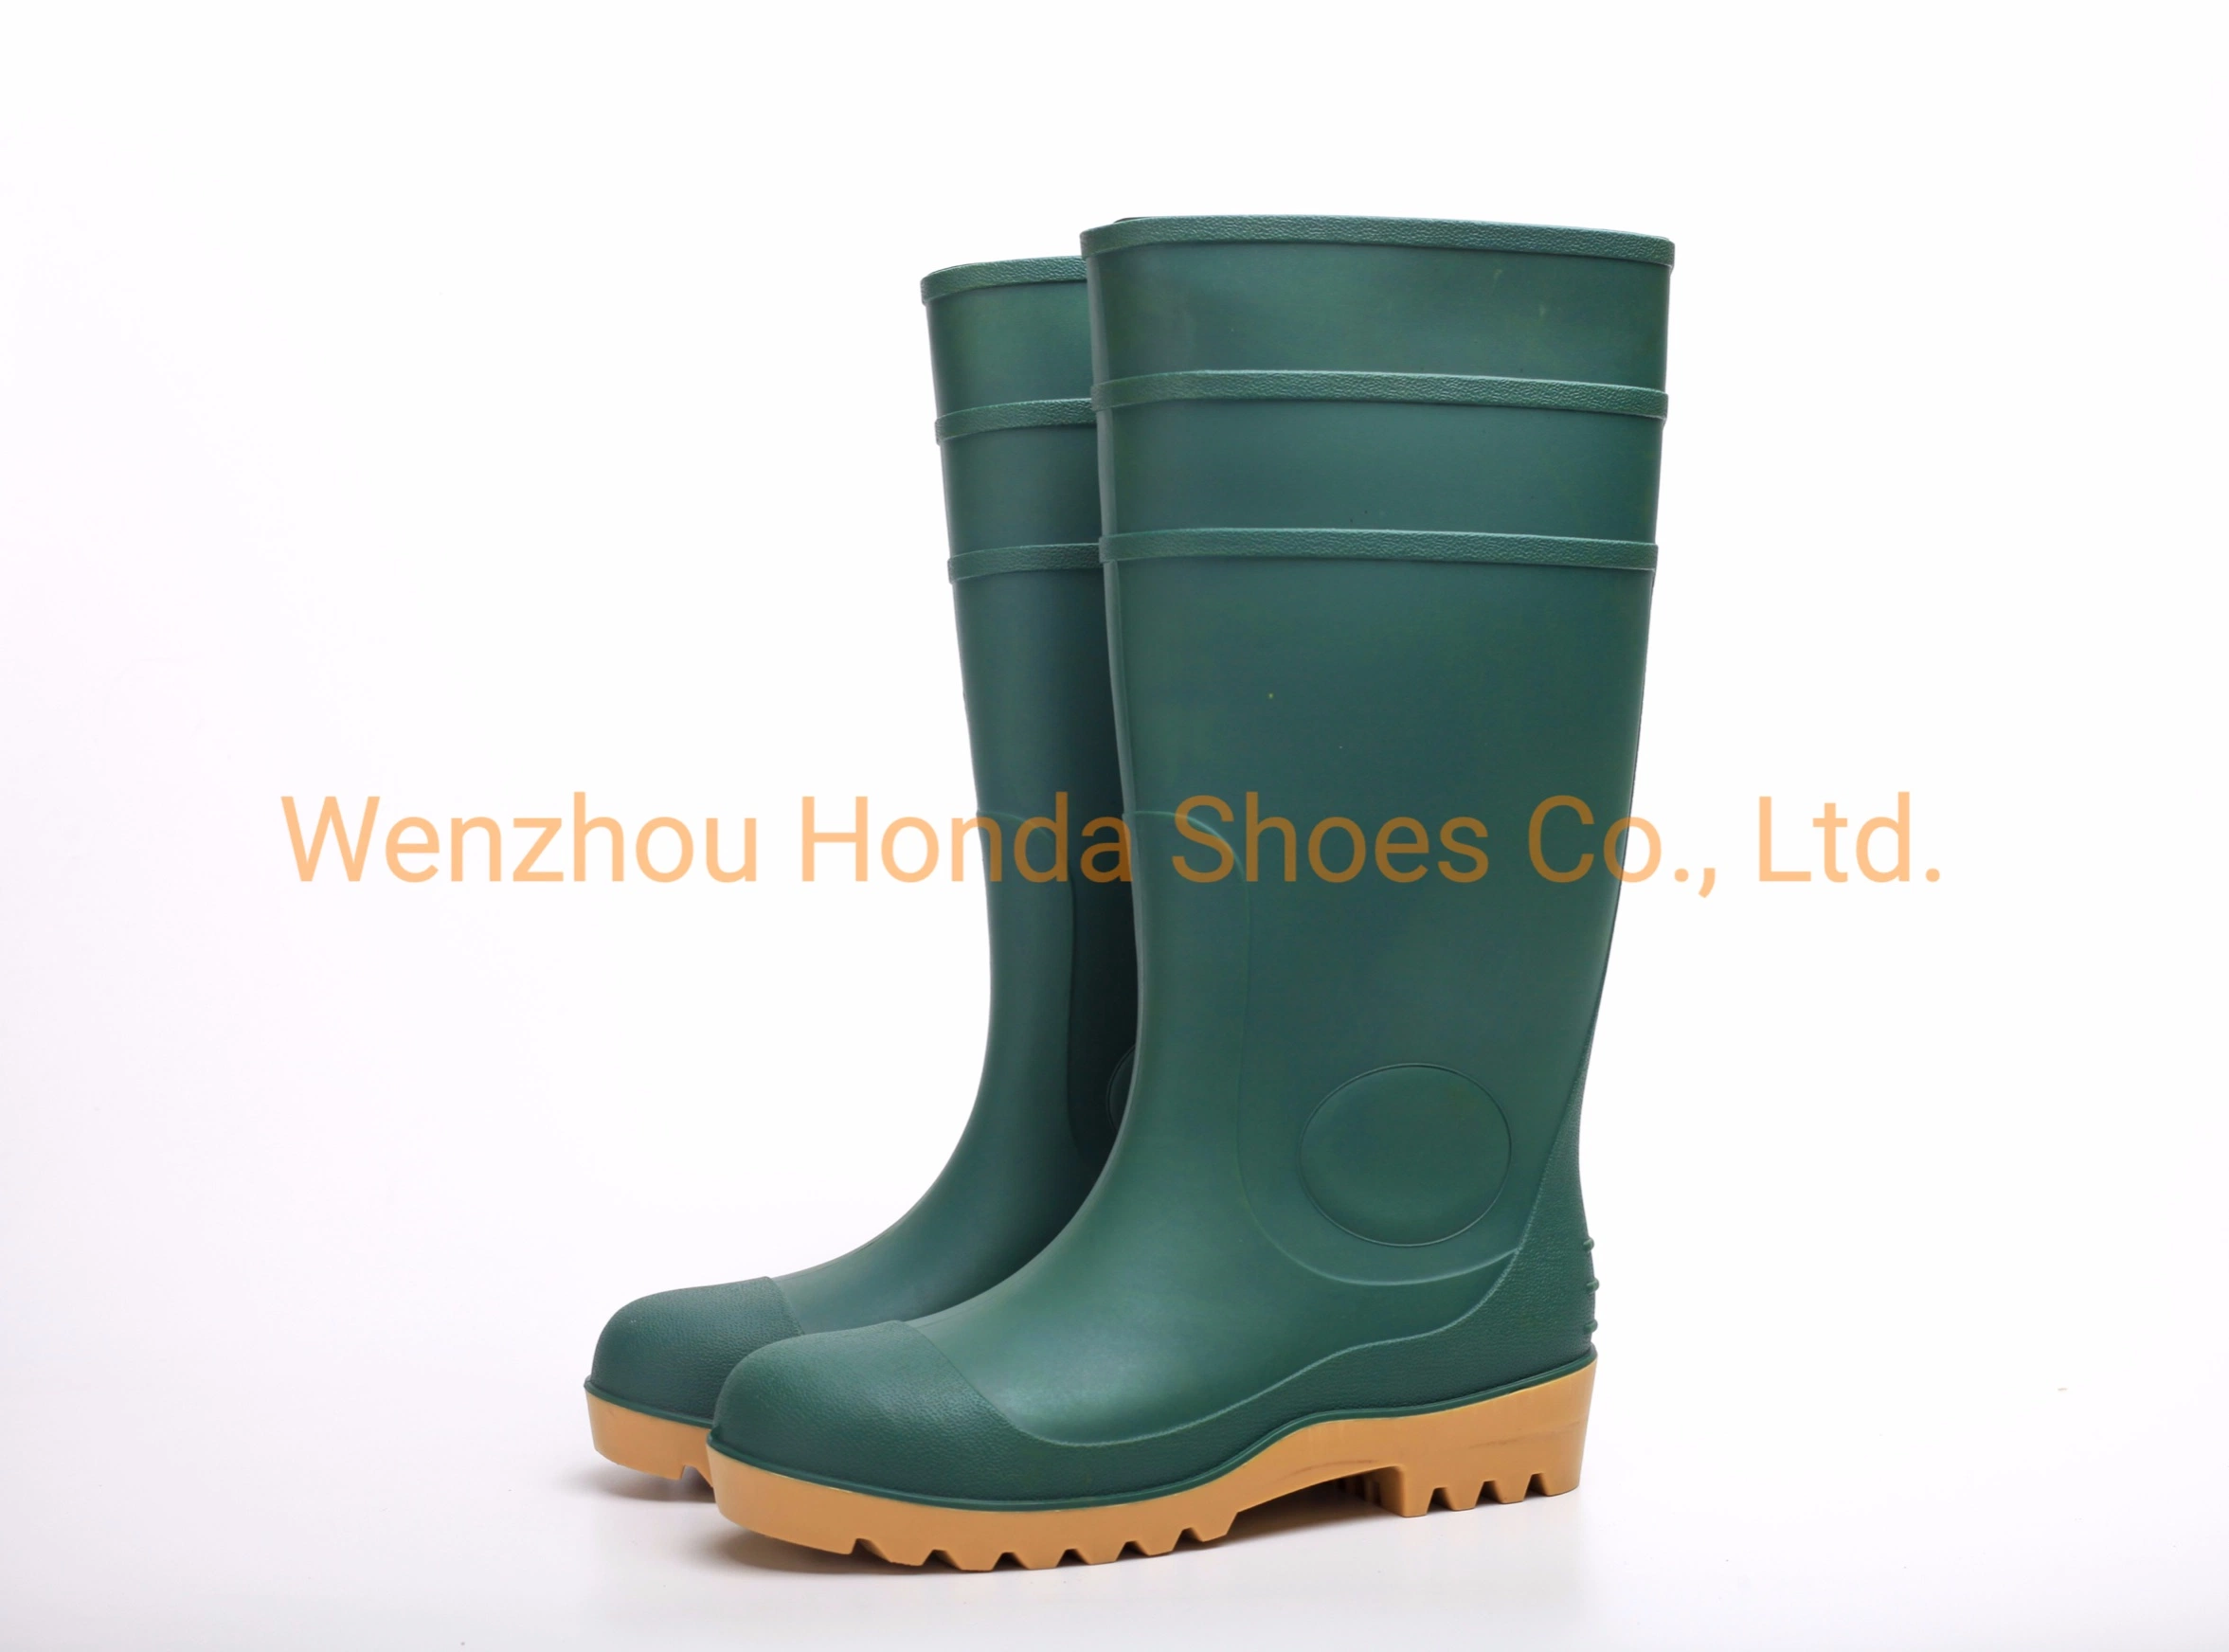 Industrial Safety Rain Boot with Waterproof